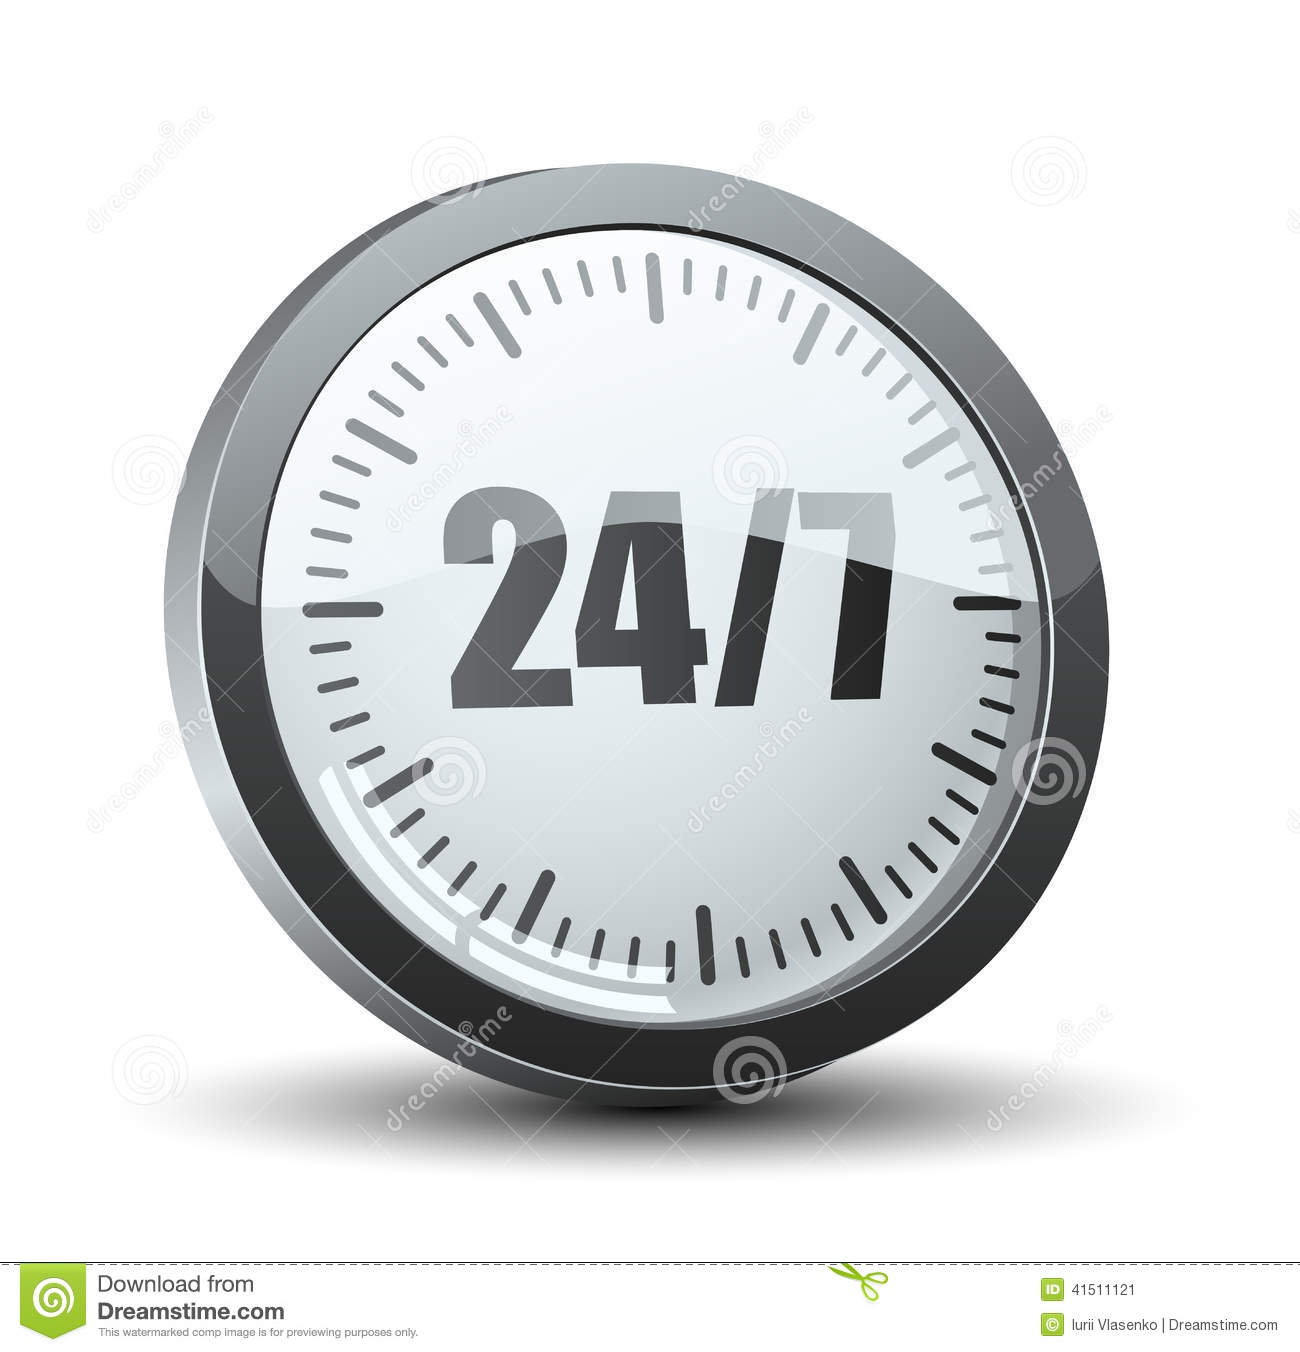 24 7 Service Delivery Button Icon Stock Vector   Image  41511121